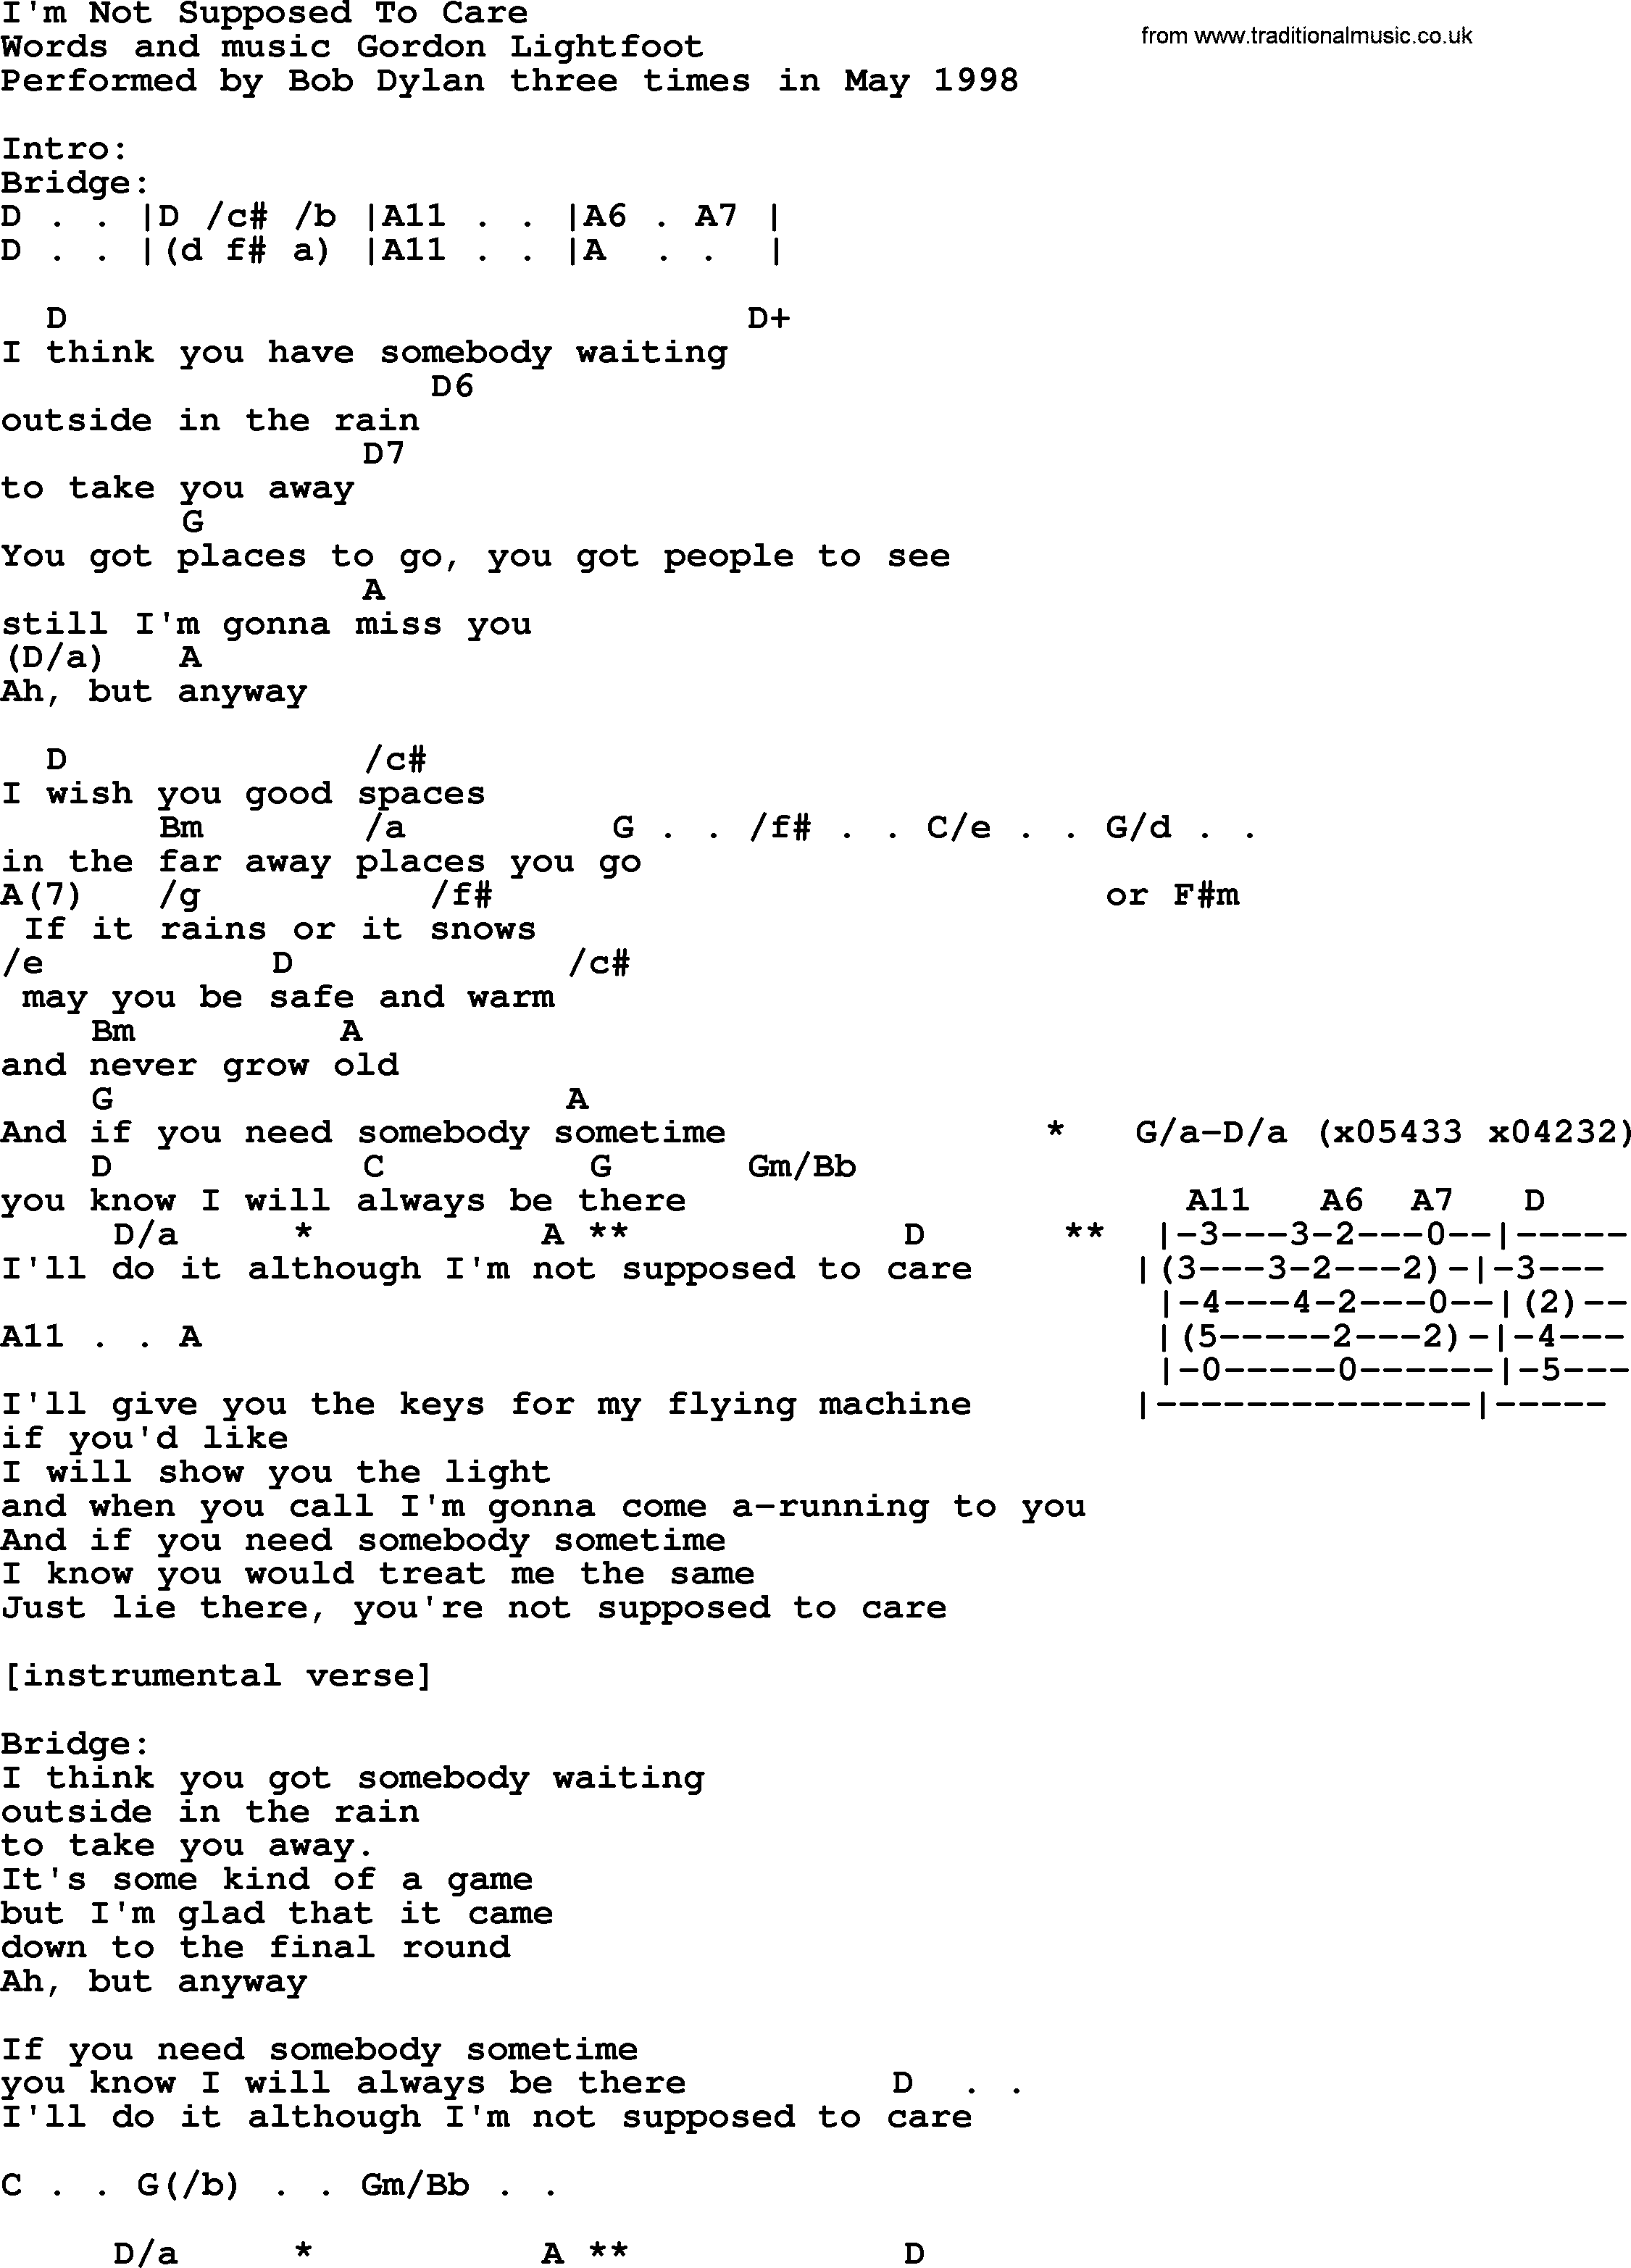 Bob Dylan song, lyrics with chords - I'm Not Supposed To Care